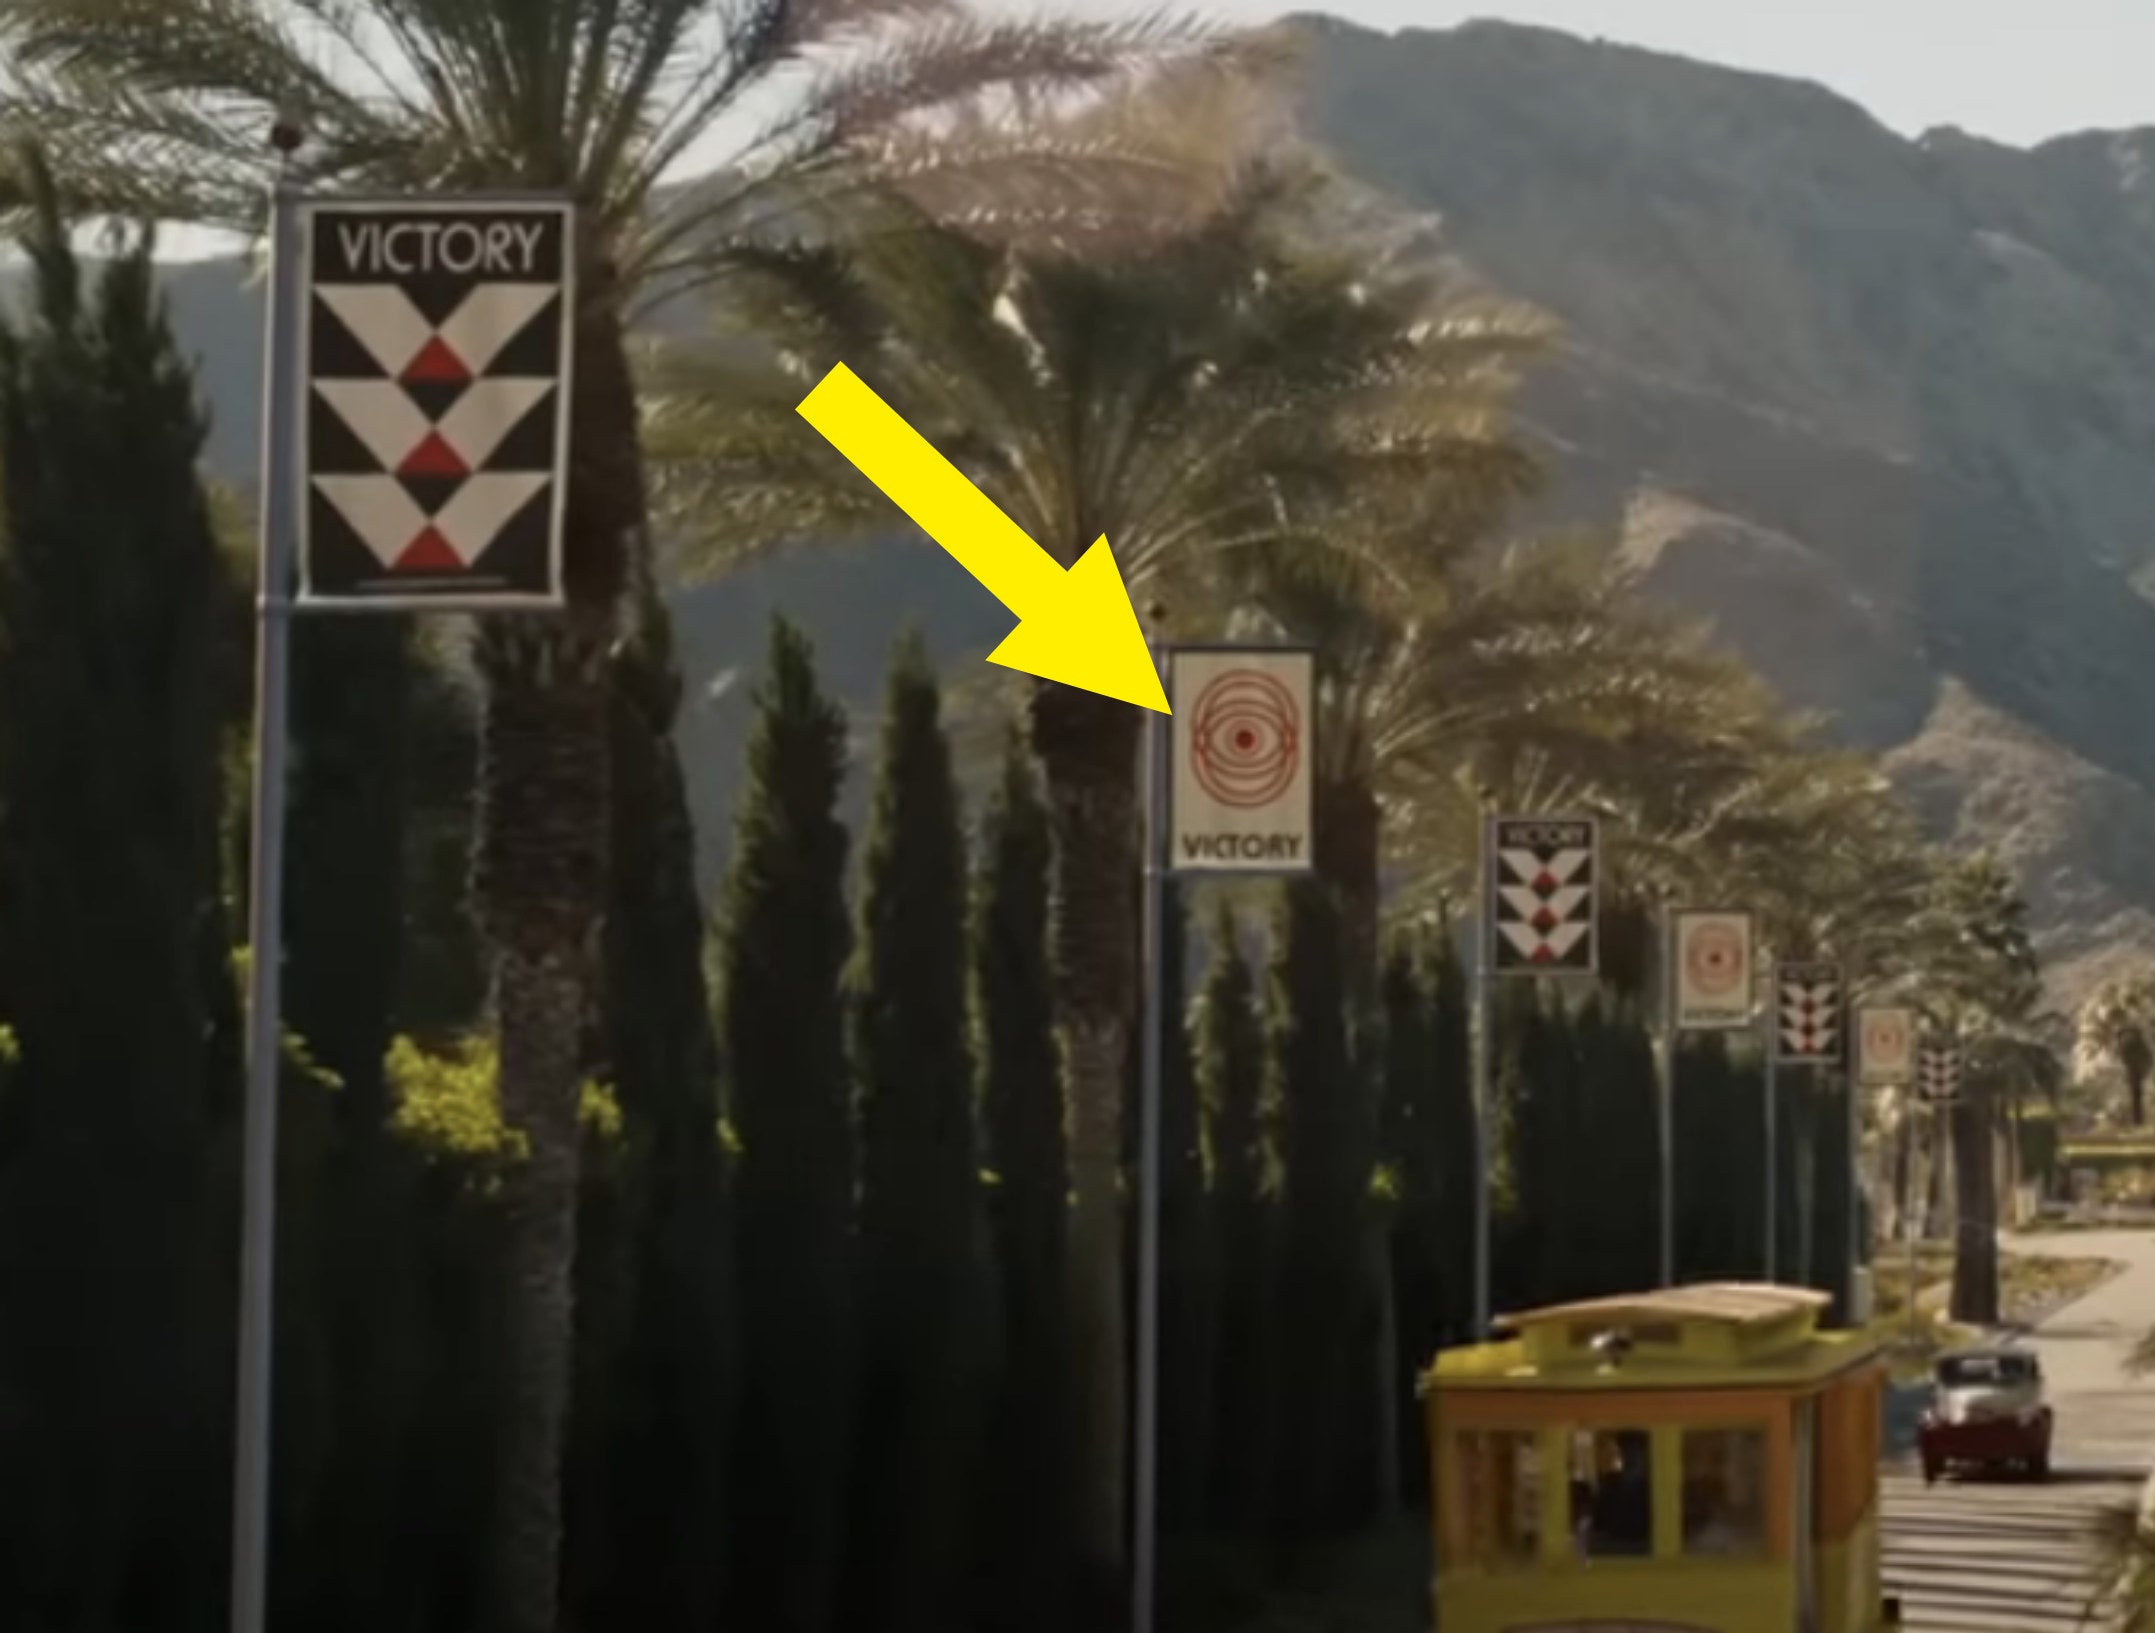 An arrow points out a sign on the side of the road that says &quot;Victory&quot; with an eye logo